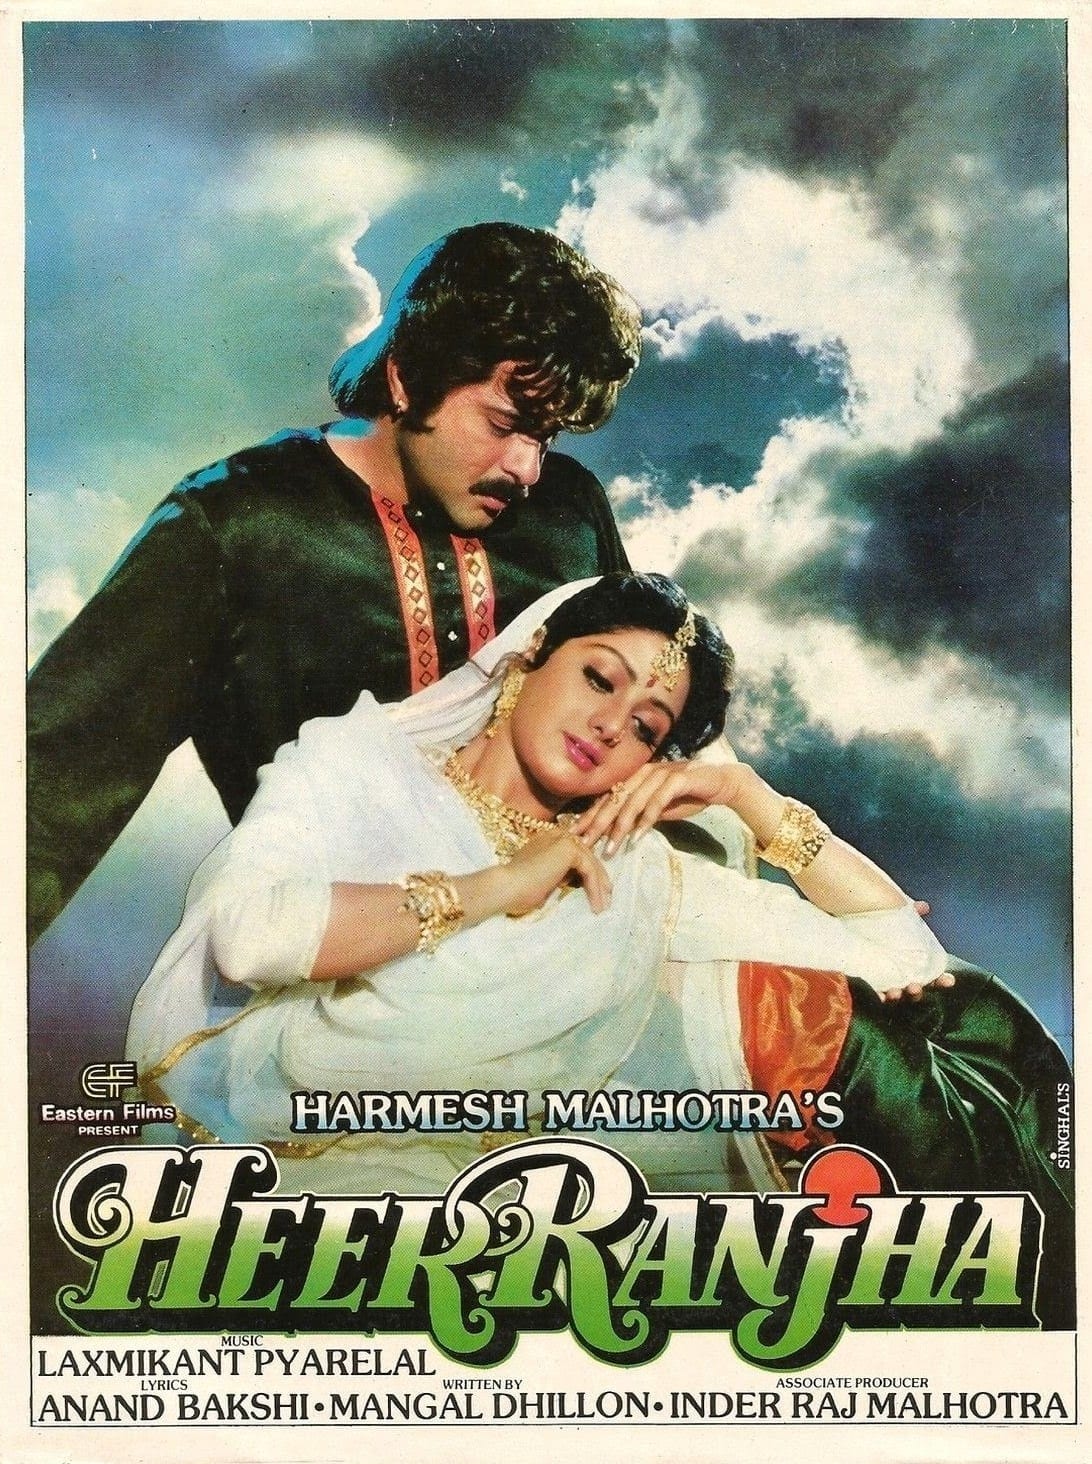 Poster for the movie "Heer Ranjha"